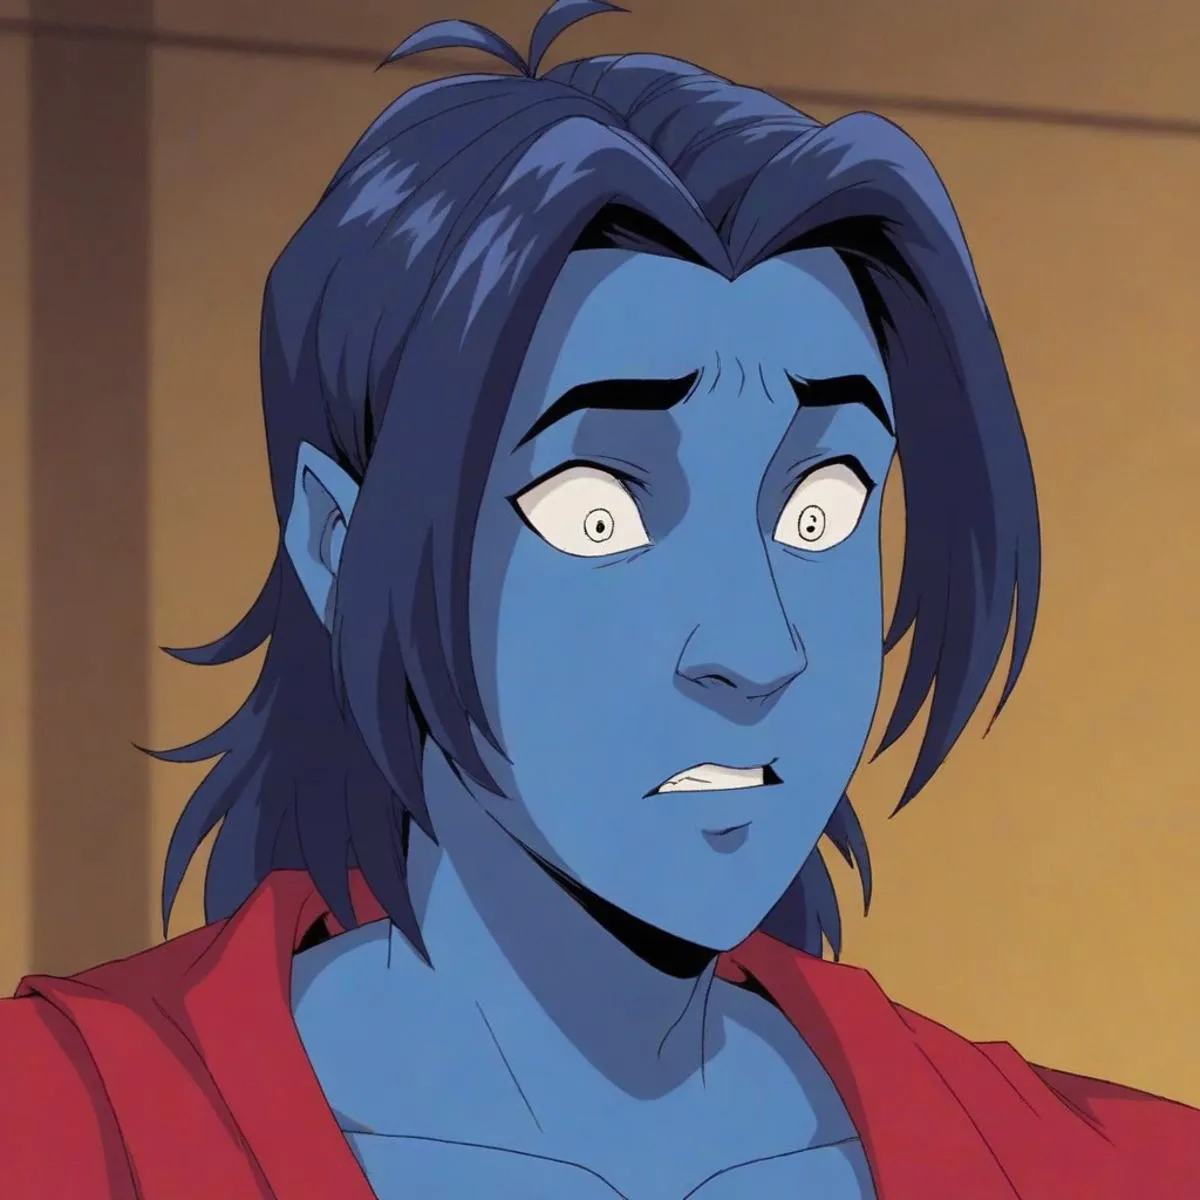 Anime-style artwork of a blue-skinned character with long, dark blue hair and a surprised expression. AI generated using Stable Diffusion.